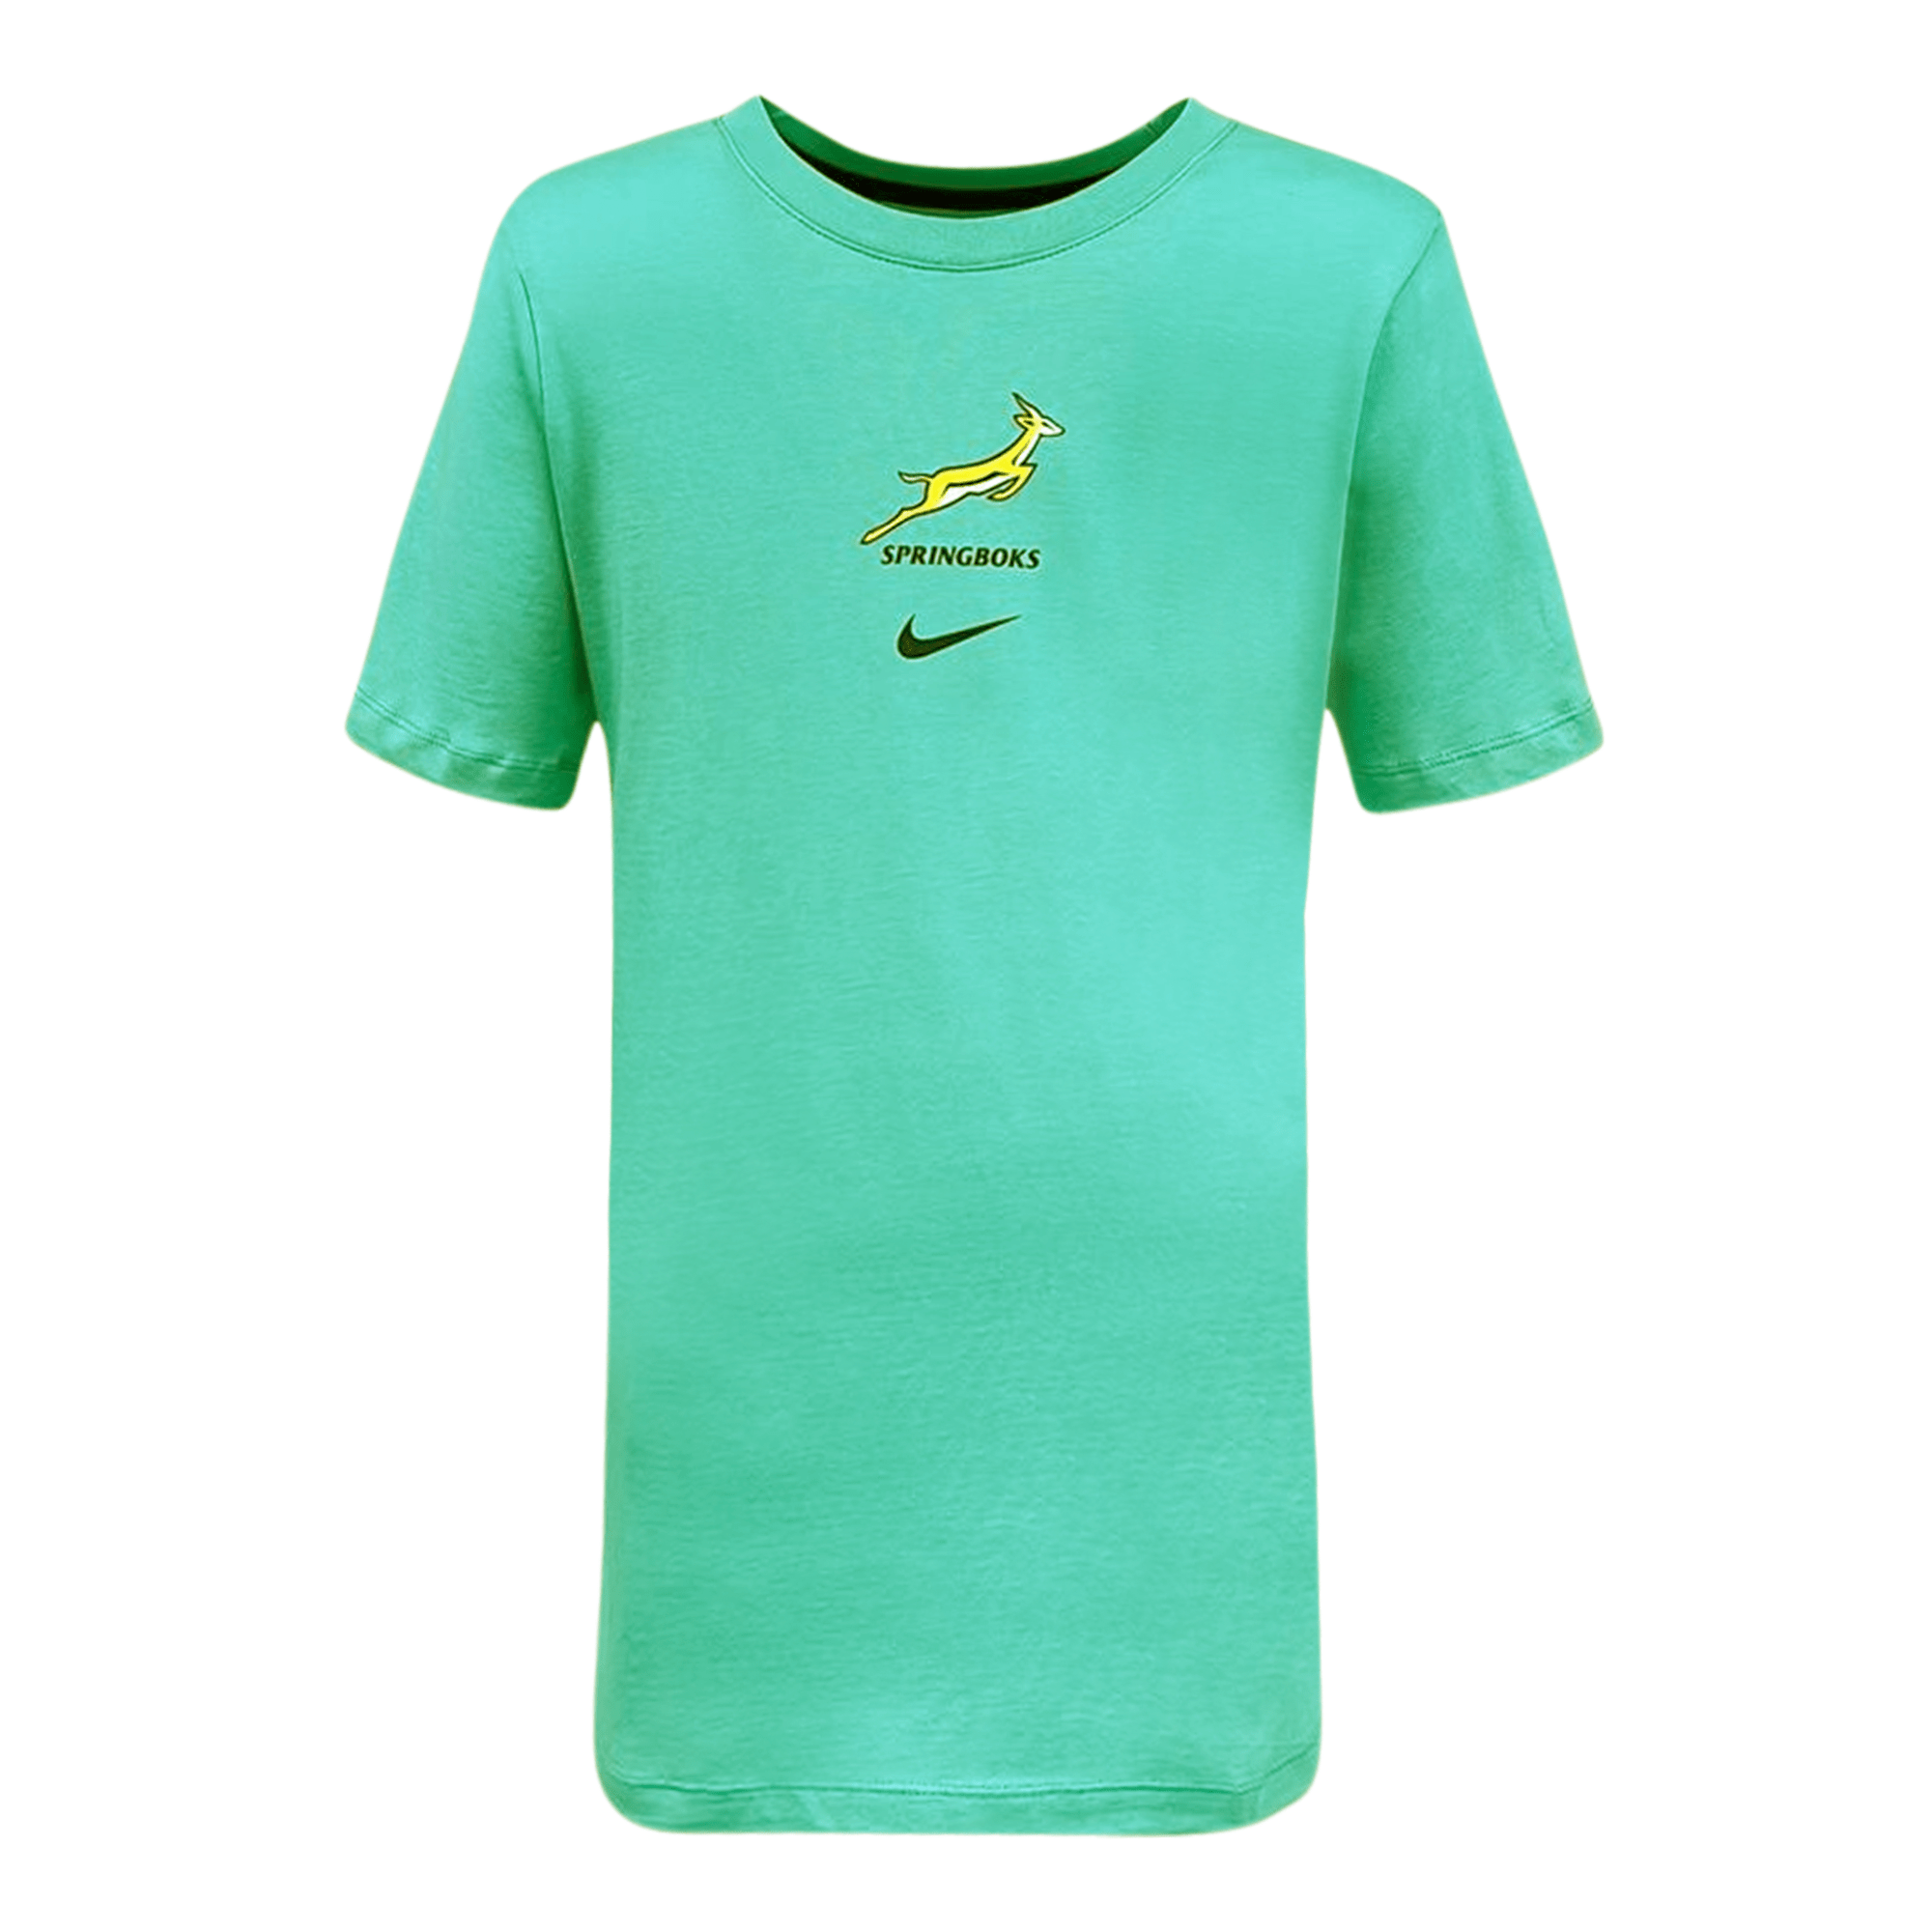 Springboks Rugby Youth Unity T-Shirt 23/24 by Nike | World Rugby Shop YM / Light Green